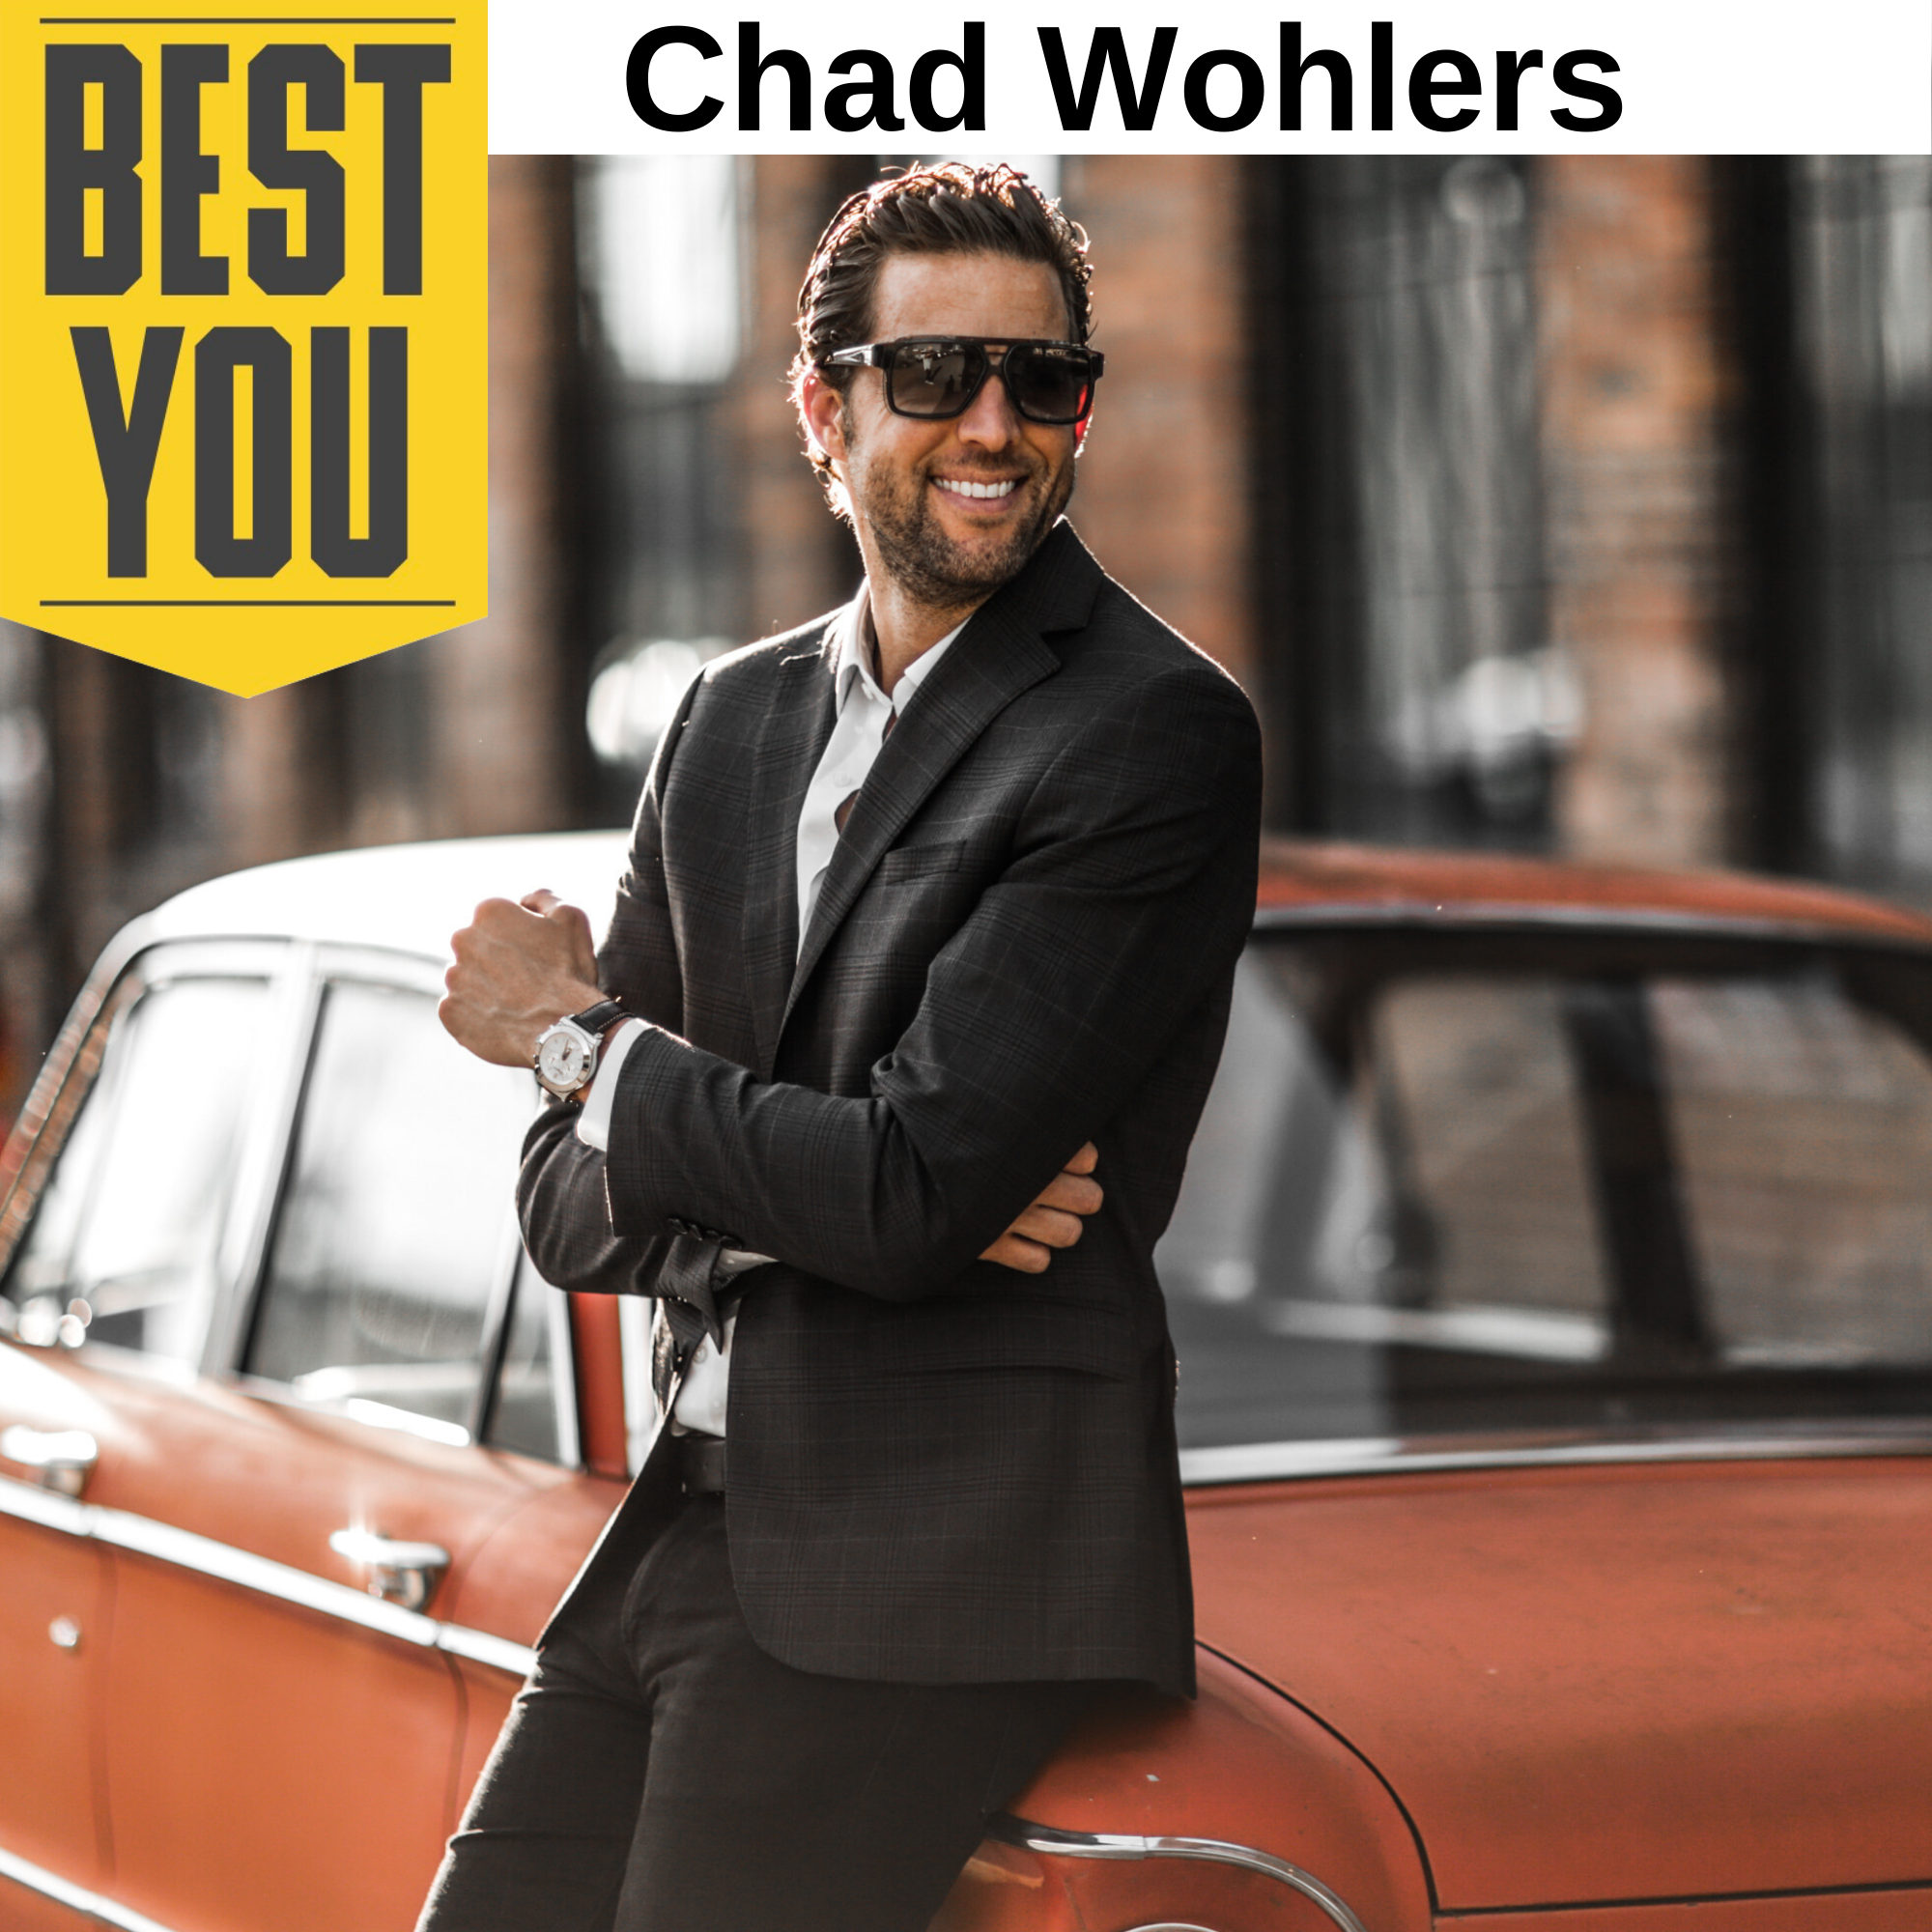 Ep. 130 Chad Wohlers - How to Brand Yourself Authentically